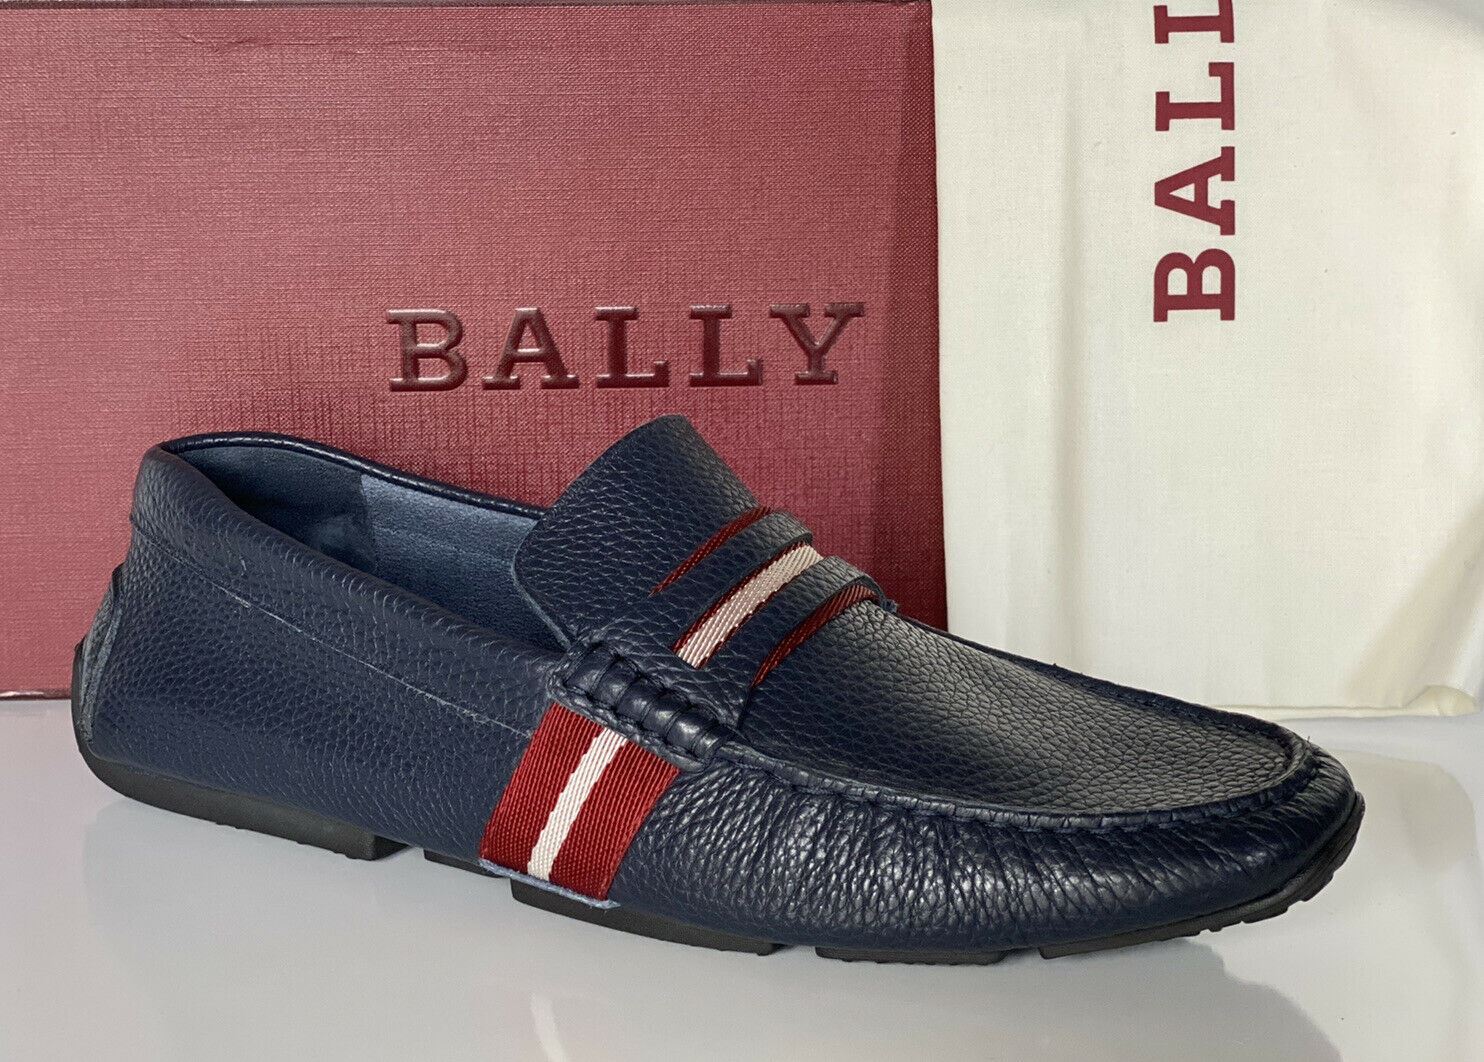 NIB Bally Mens Bovine Grained Leather Driver Shoes Blue 10 US 6228300 Italy